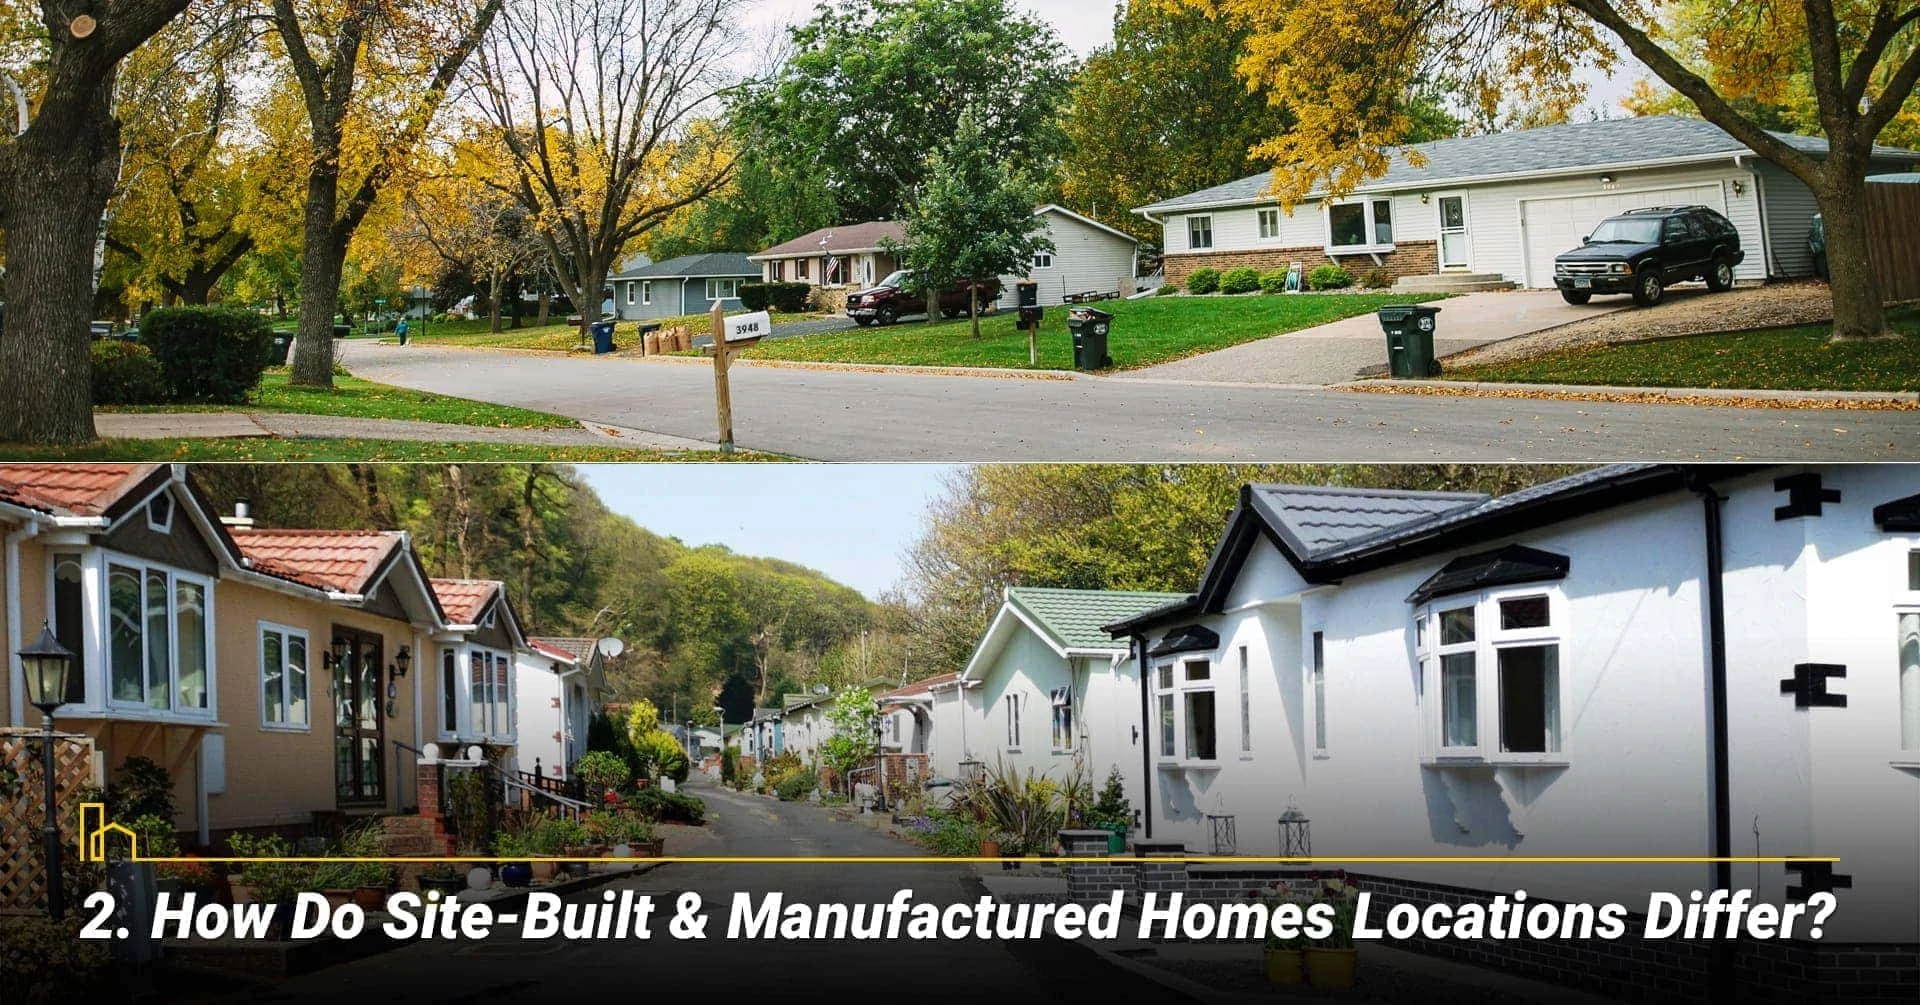 How Do Site-Built & Manufactured Homes Locations Differ? locations for site-built and manufactured homes